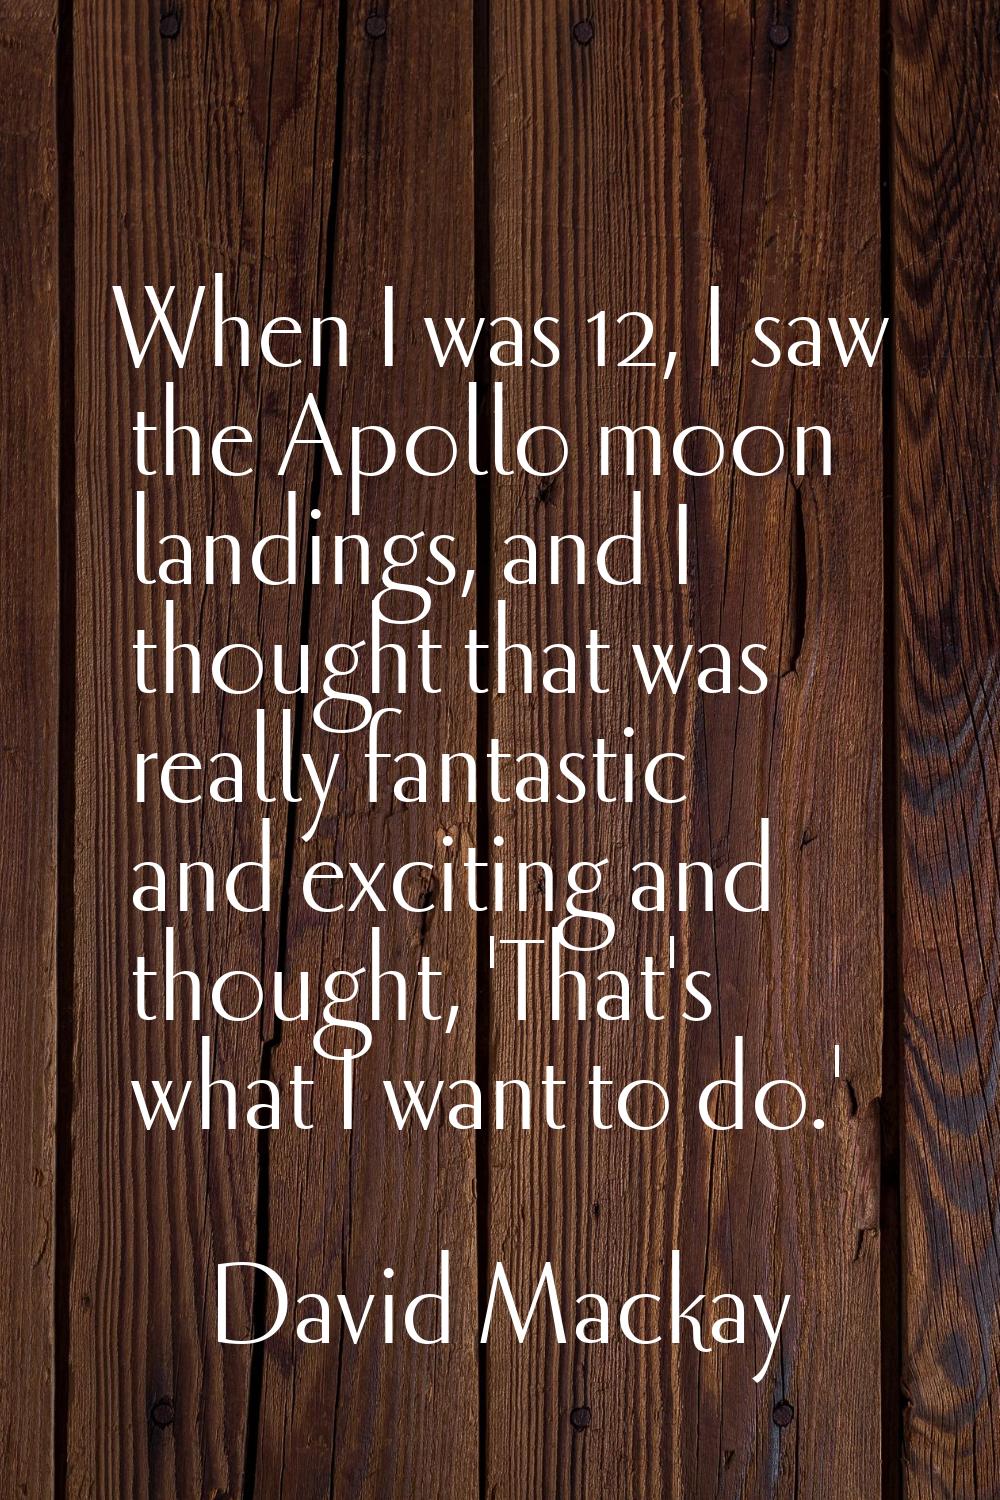 When I was 12, I saw the Apollo moon landings, and I thought that was really fantastic and exciting